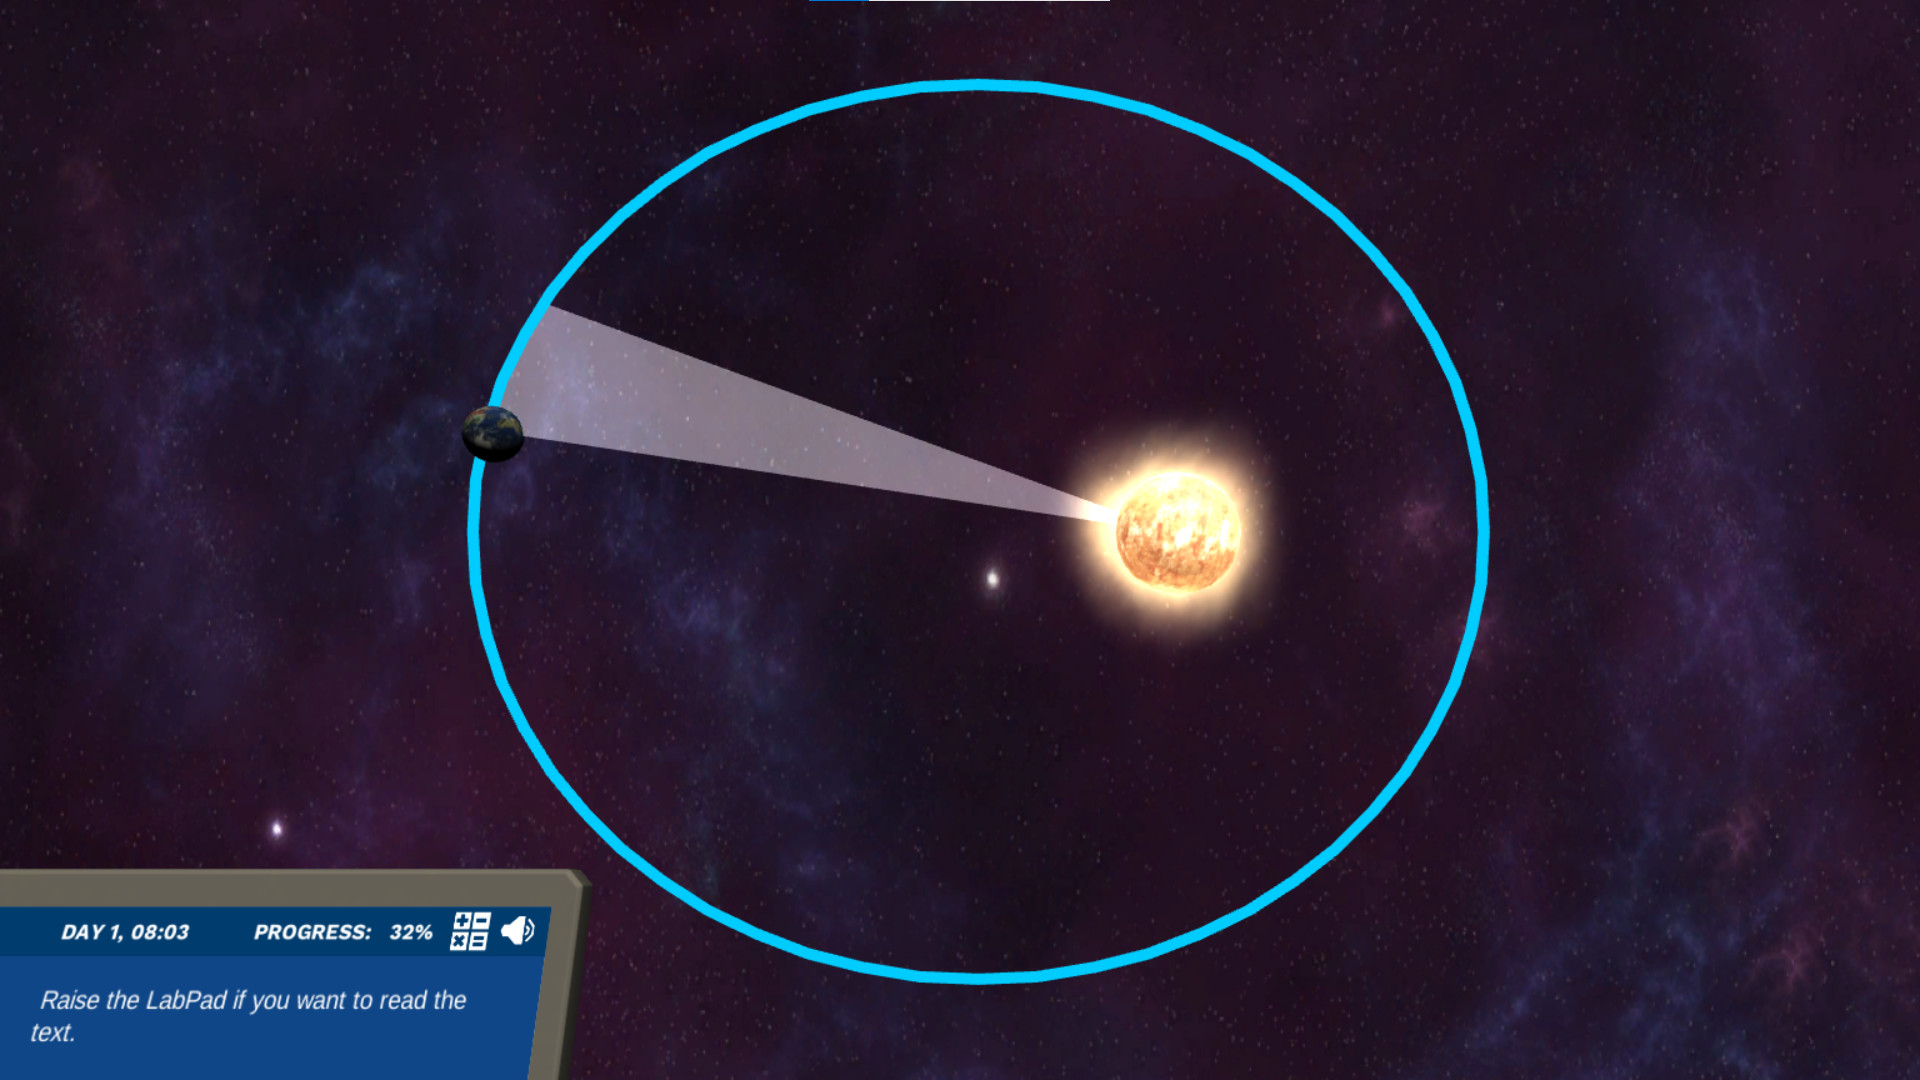 Kepler's laws: Explore the orbits of other worlds